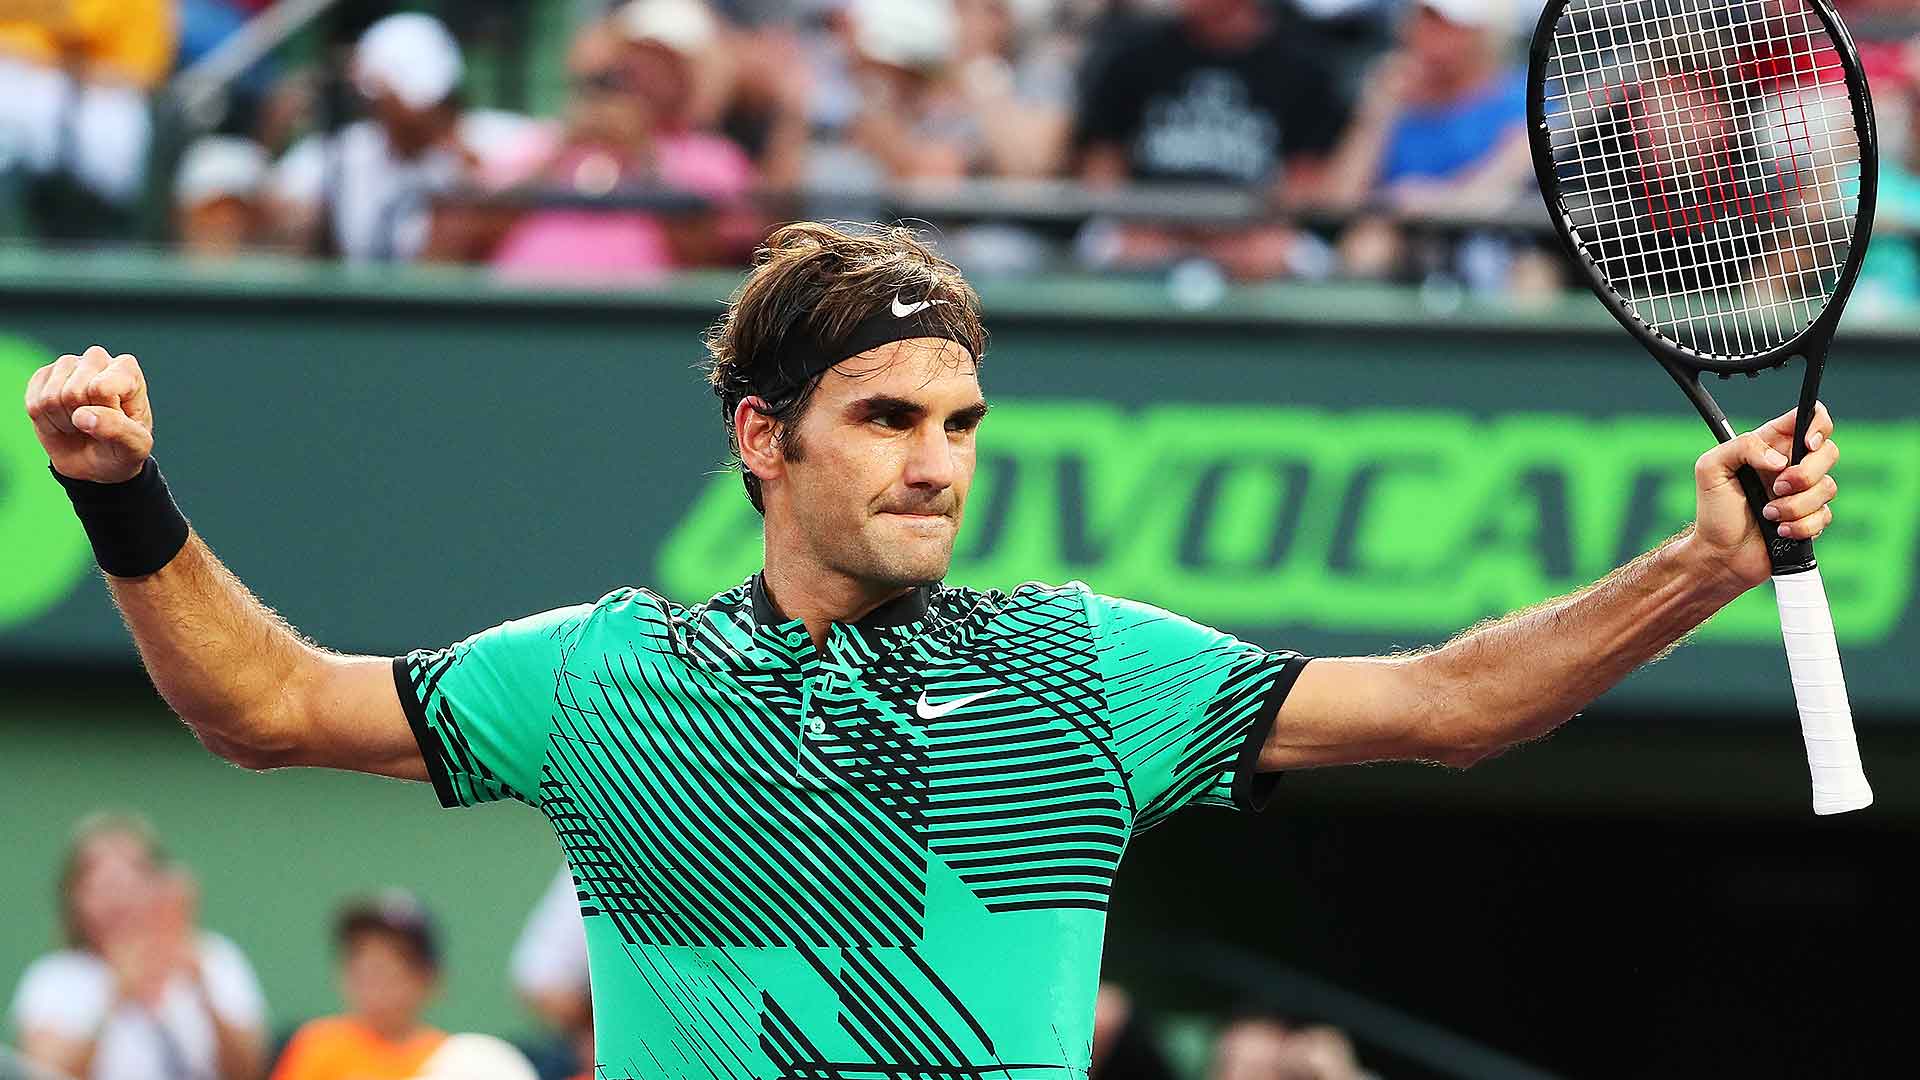 Roger Federer improves to a 6-0 FedEx ATP Head2Head record against Roberto Bautista Agut with victory in the Miami fourth round.